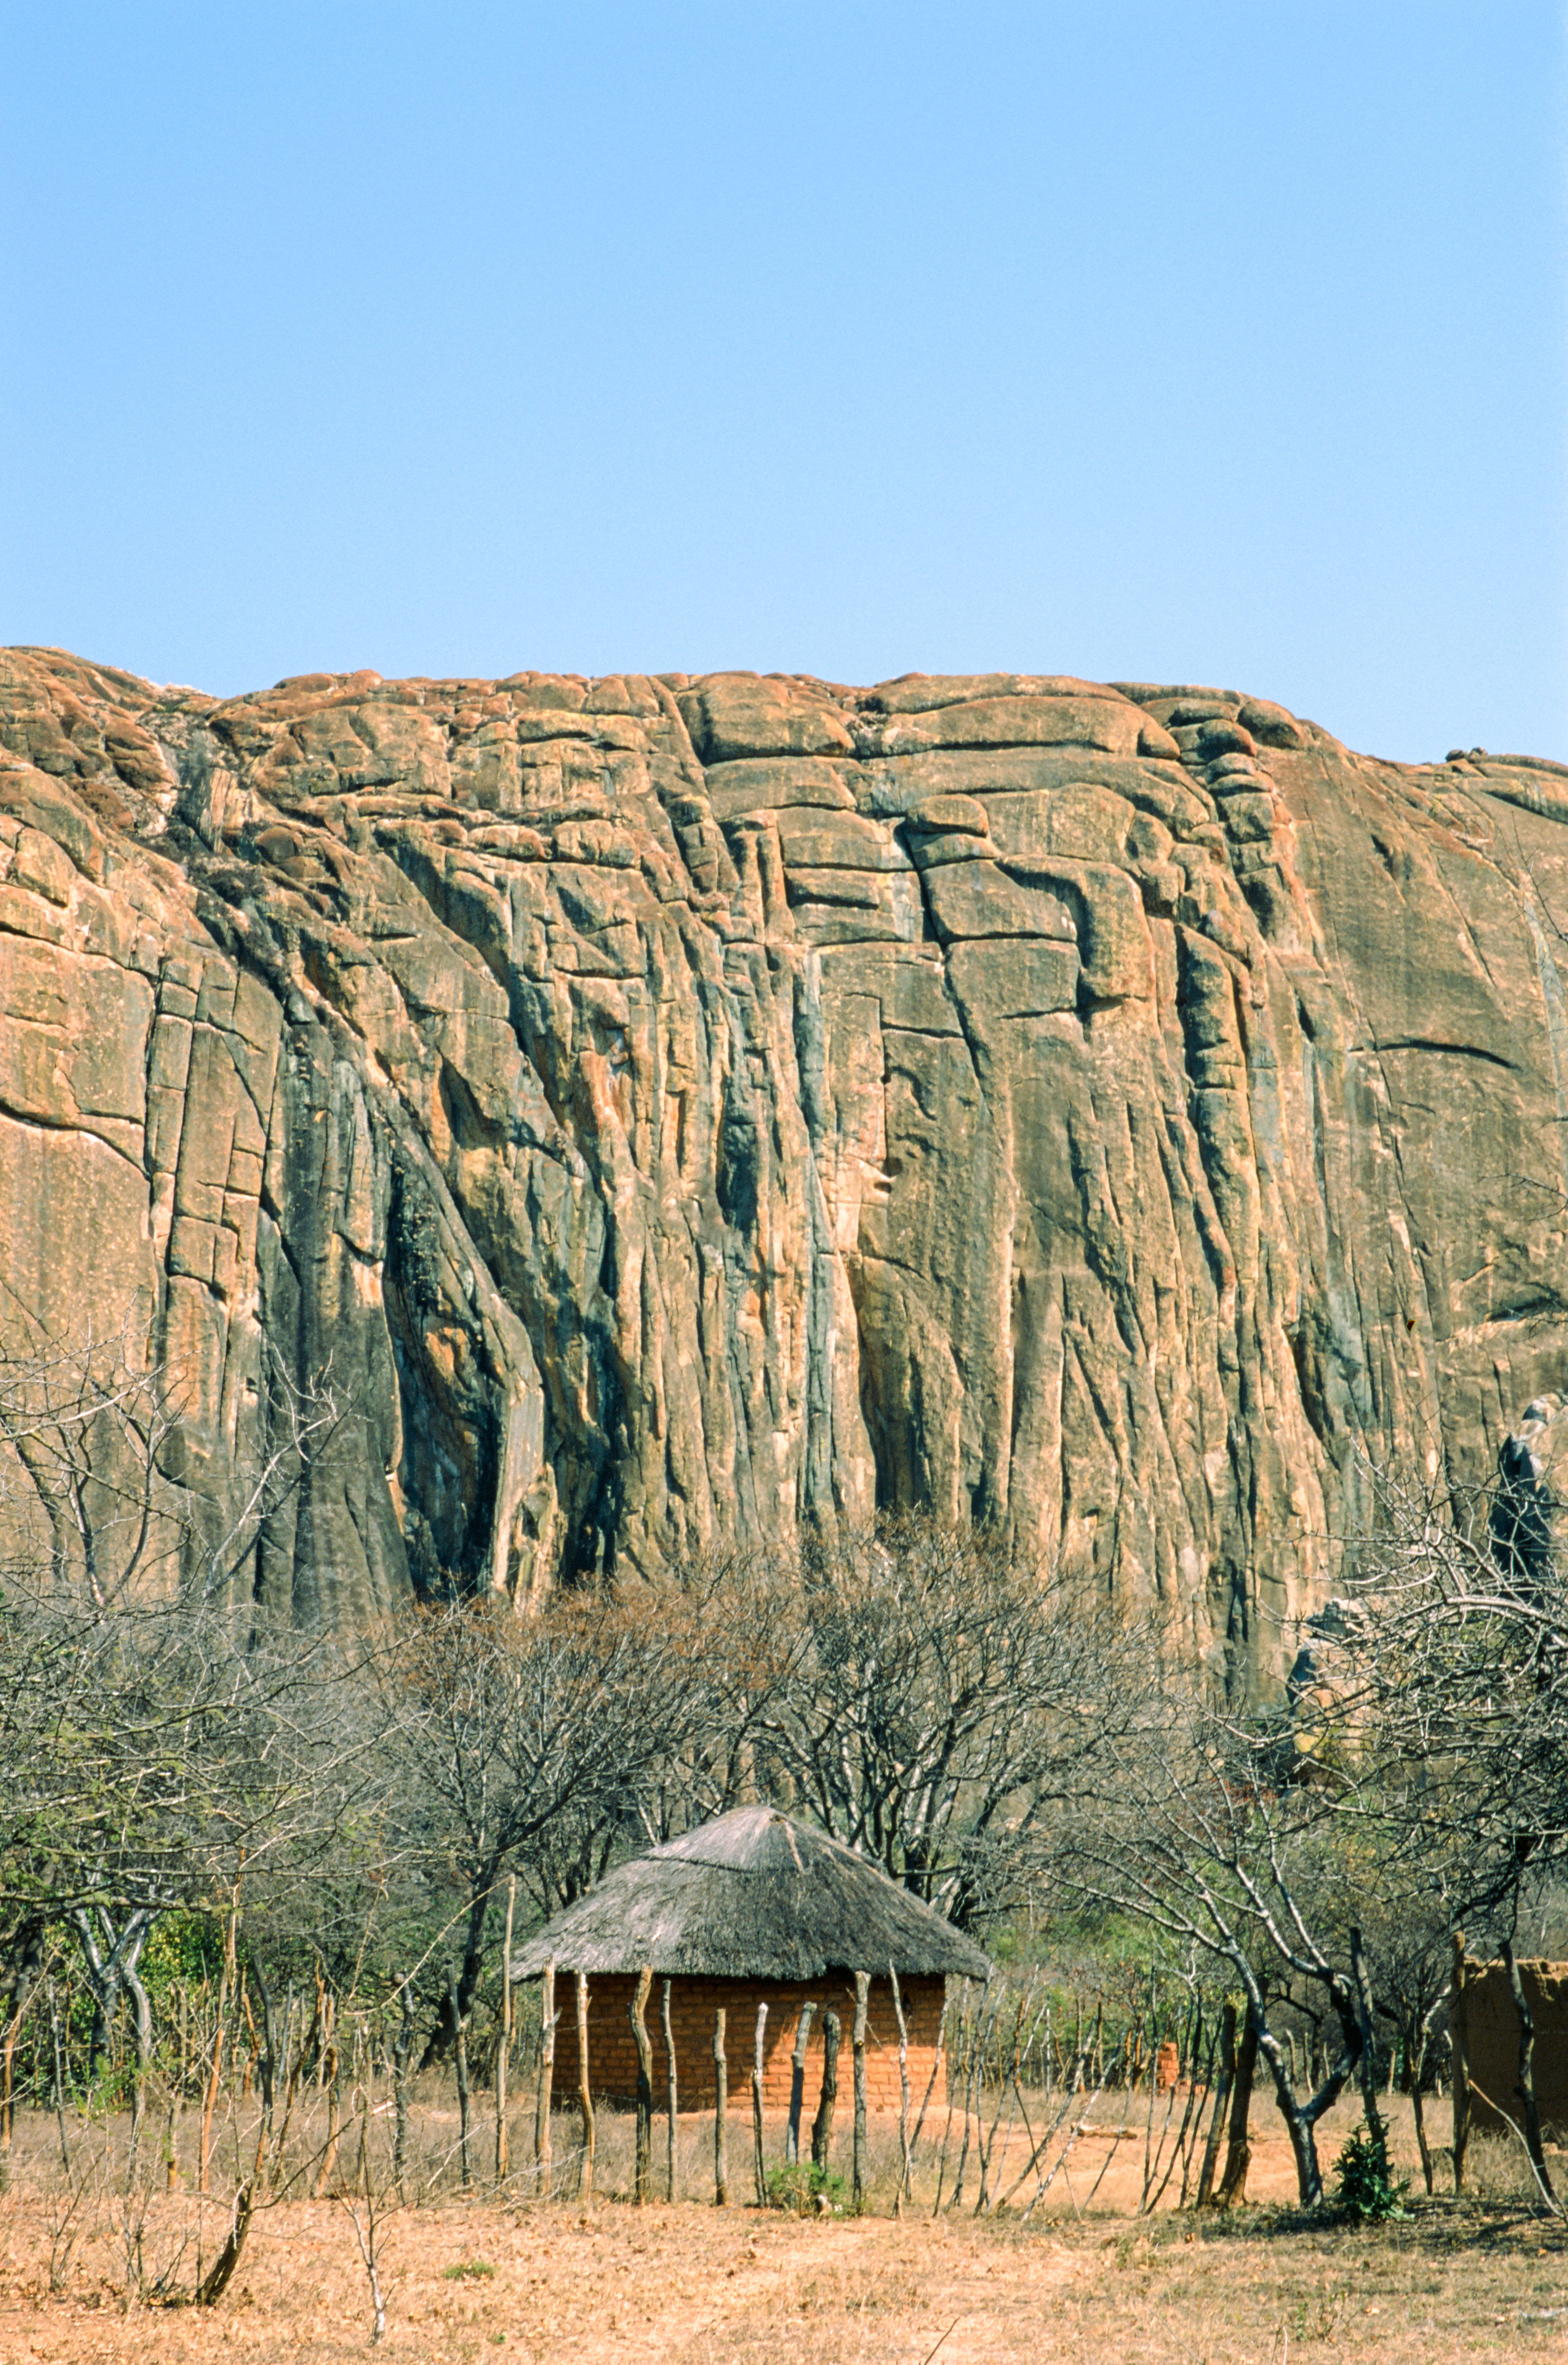 The 180m Hambushaba Wall in Zimbabwe, Southern
	   Africa. Jakob and I did a very fun all-trad first ascent
	   through the fork crack system on the leften side. (Leica
	   R9, Slide ISO 100)